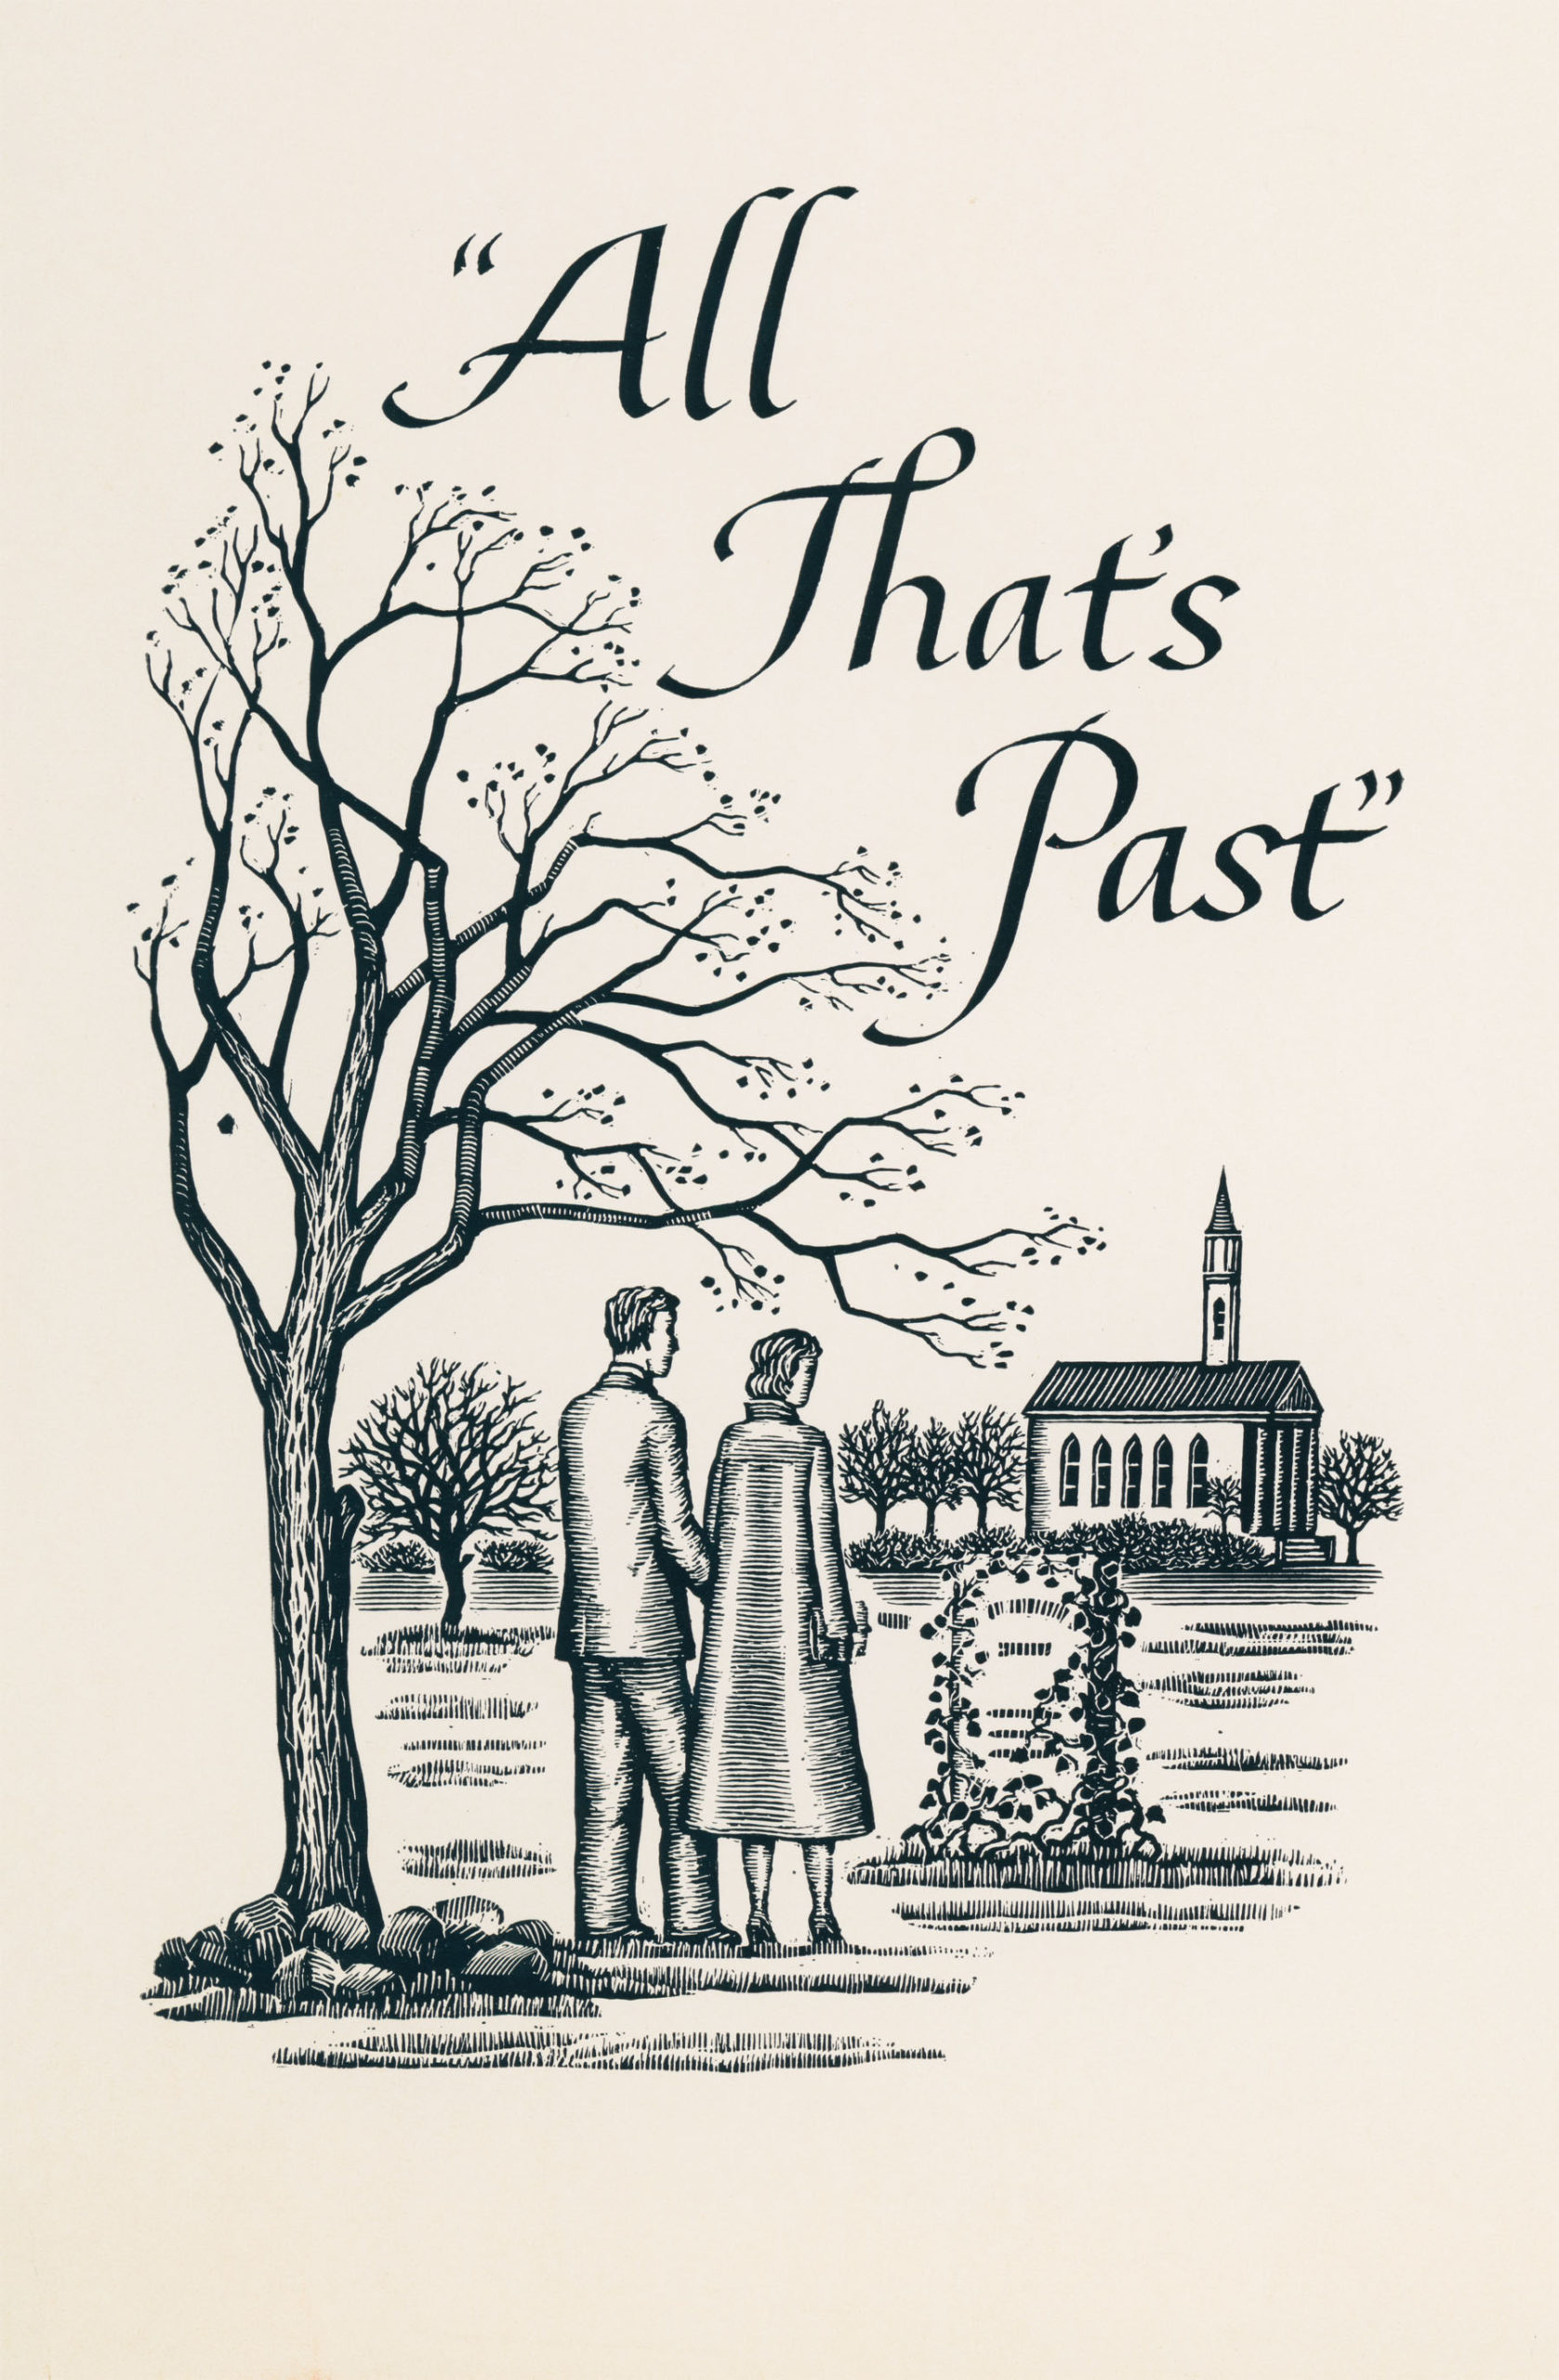 100 Poems About People: All That’s Past